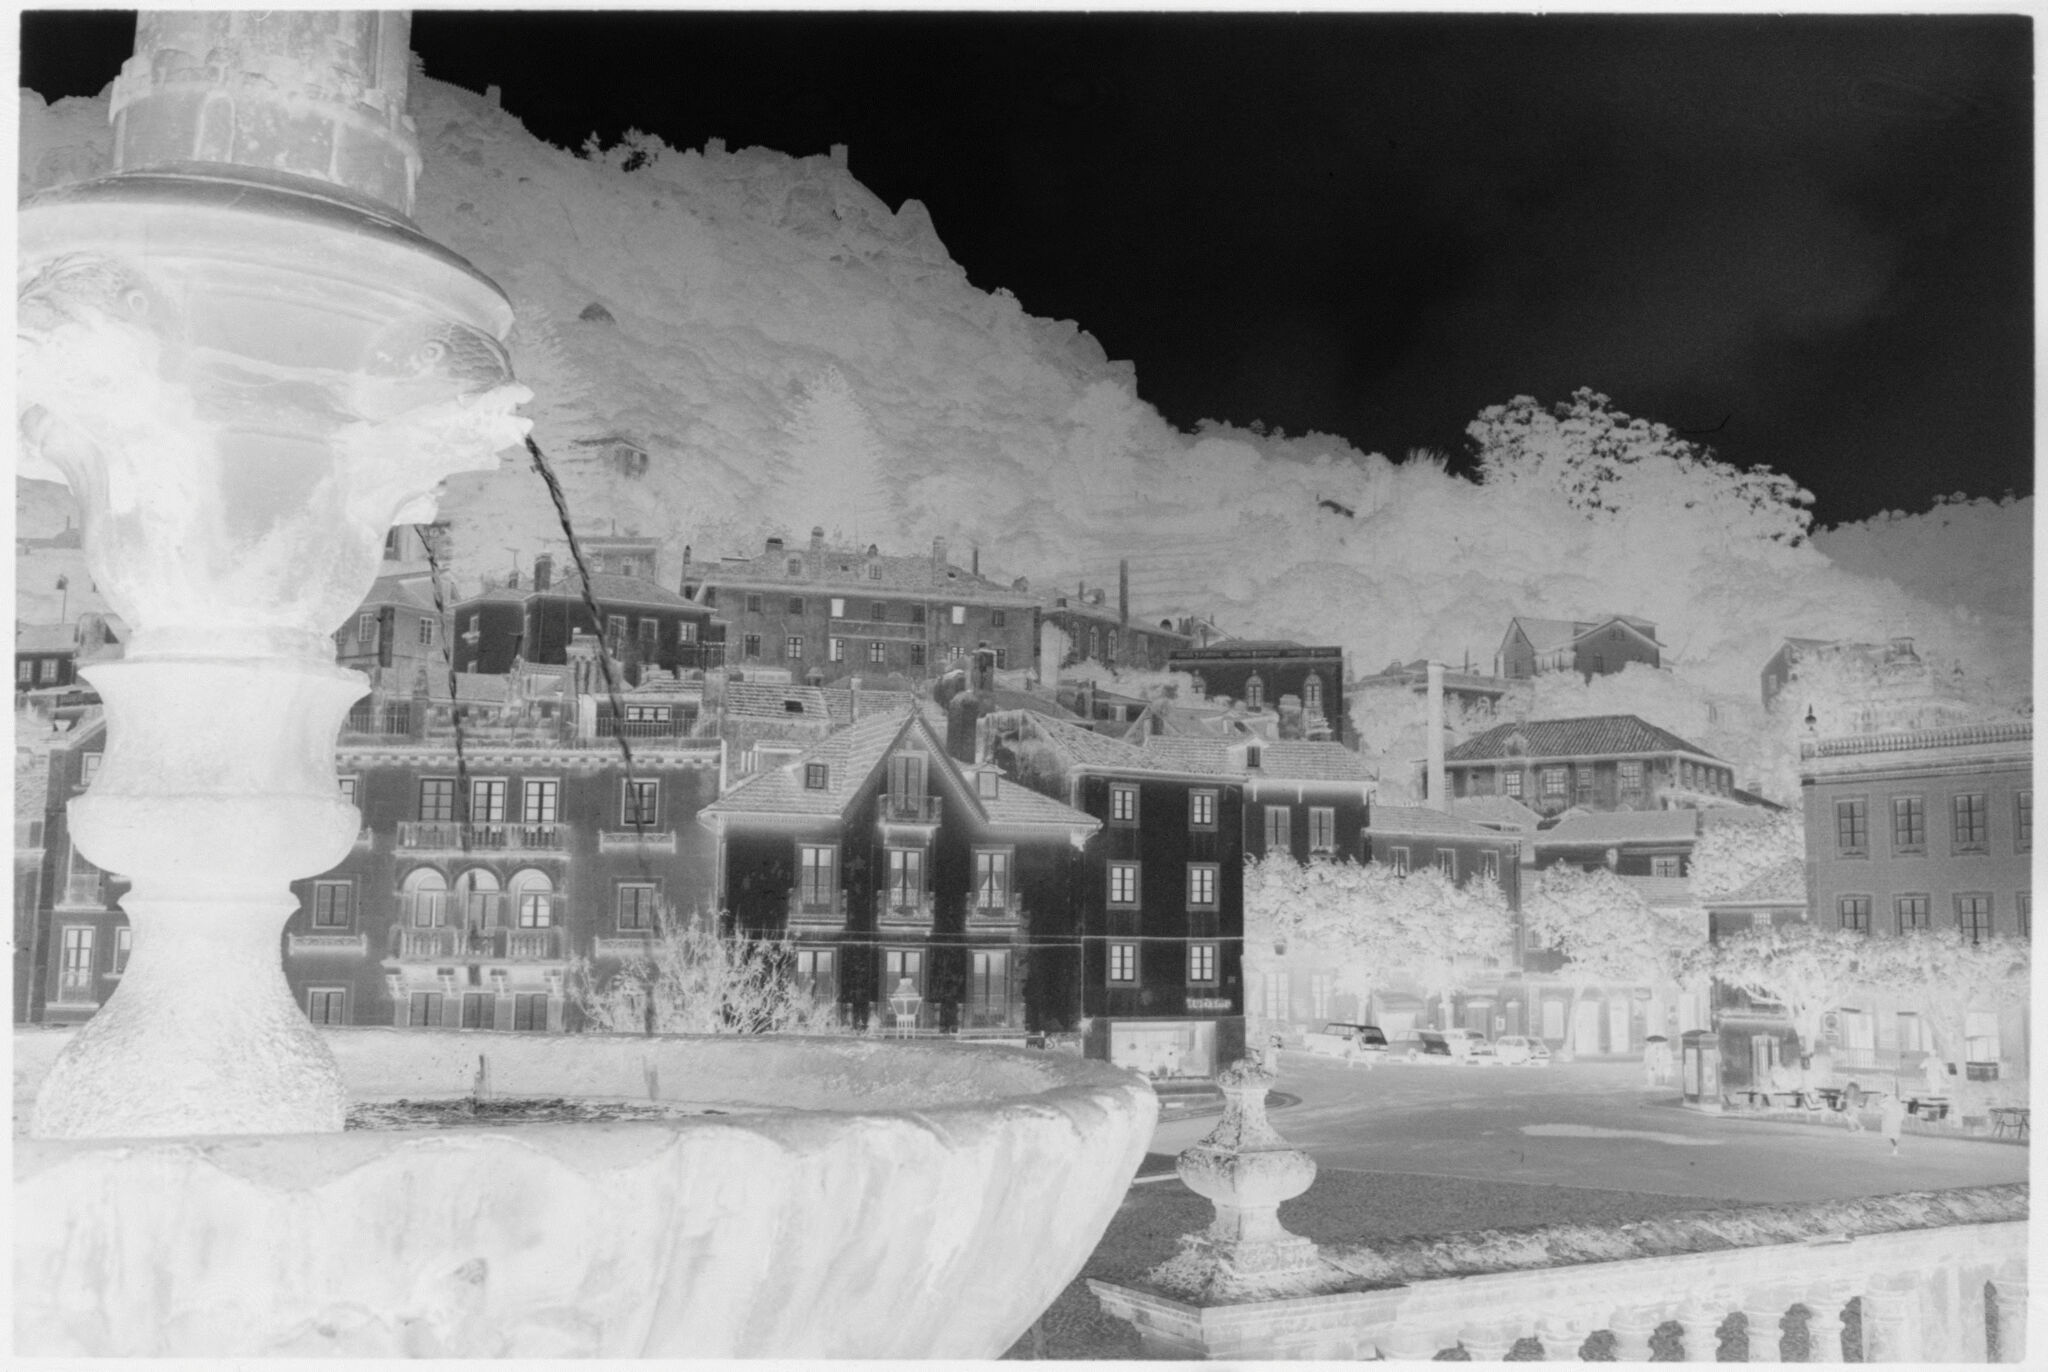 Untitled (Fountain And Buildings At Base Of Hill, Nazaré, Portugal)